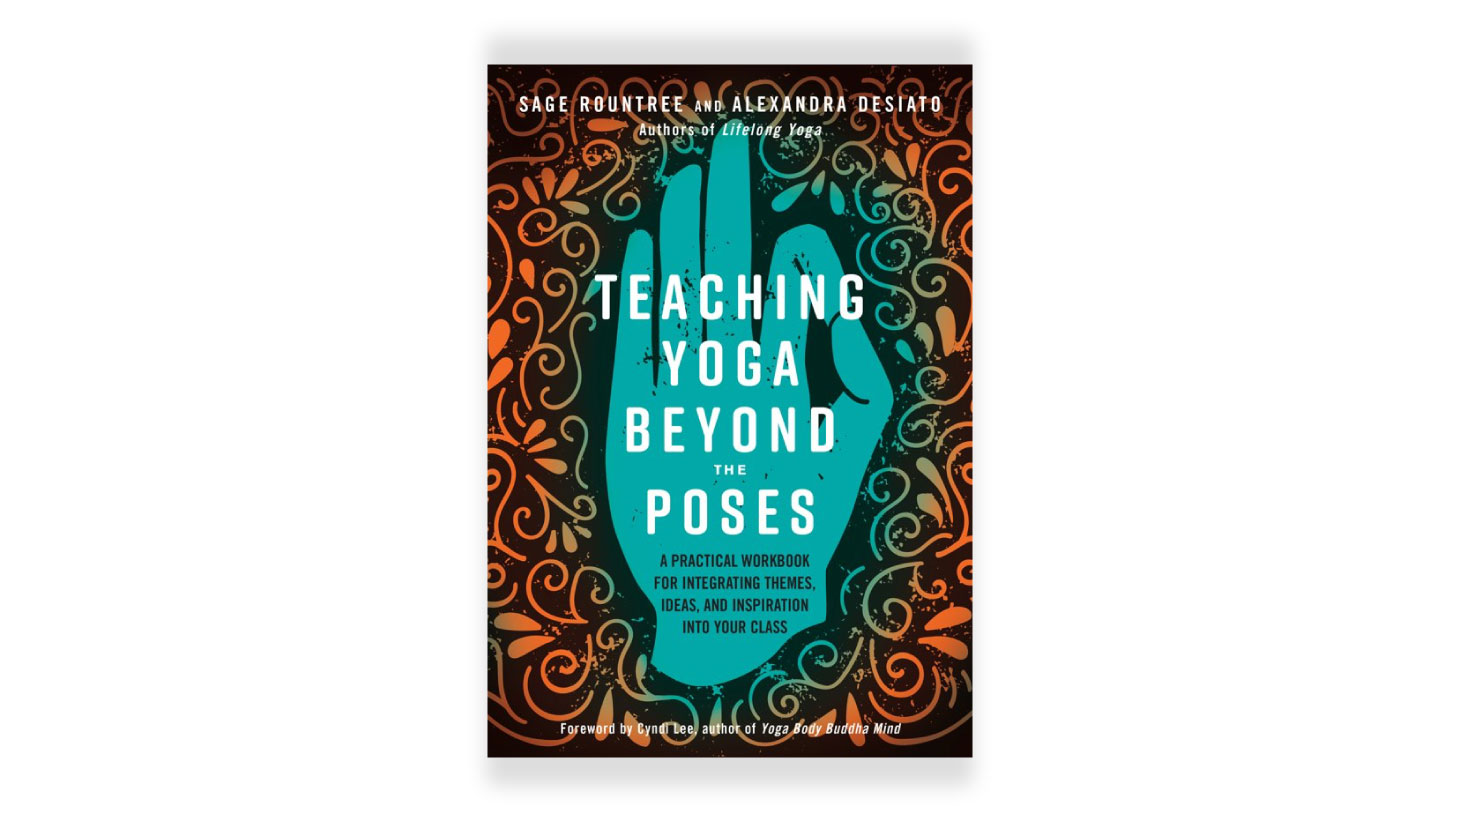 Book-3-Teaching-Yoga-Beyond-the-Poses--a-practical-workbook-for-integrating-themes,-ideas-and-inspiration-into-your-class